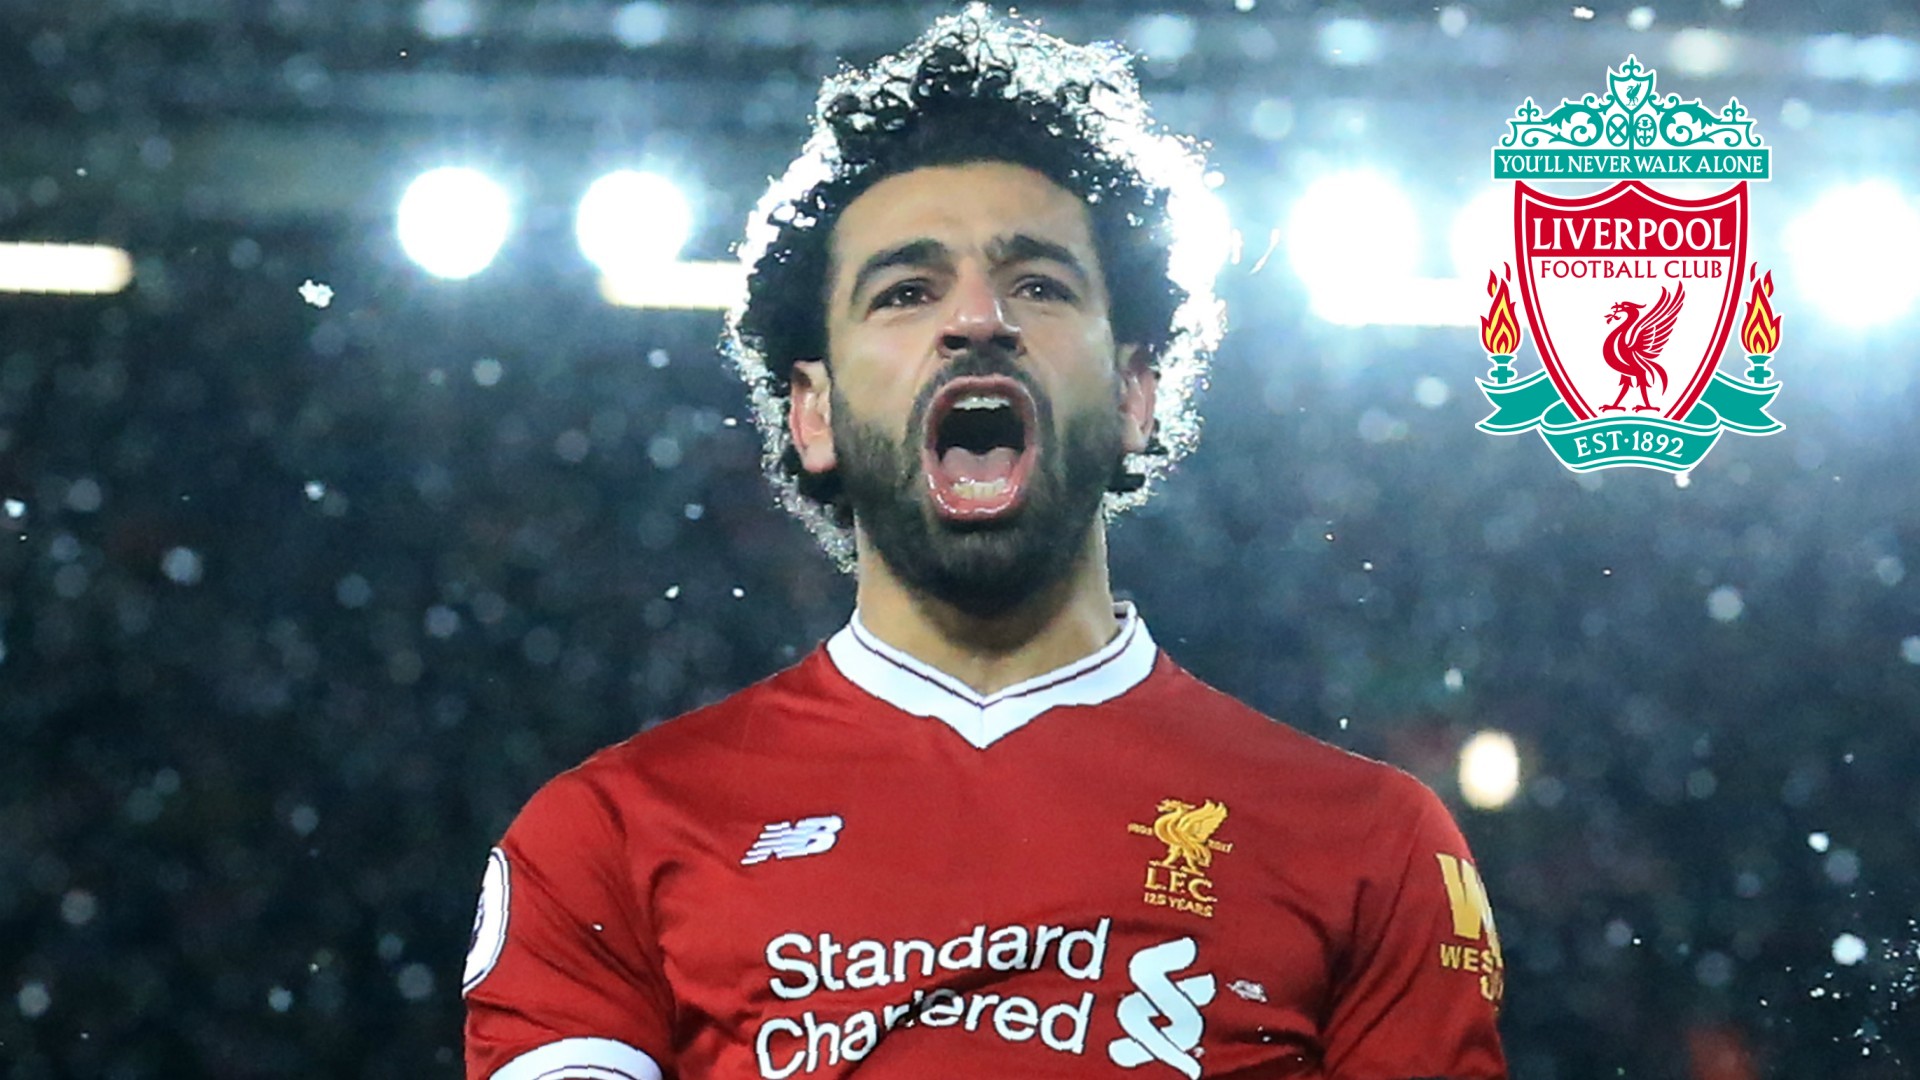 HD Liverpool Mohamed Salah Backgrounds with resolution 1920X1080 pixel. You can use this wallpaper as background for your desktop Computer Screensavers, Android or iPhone smartphones